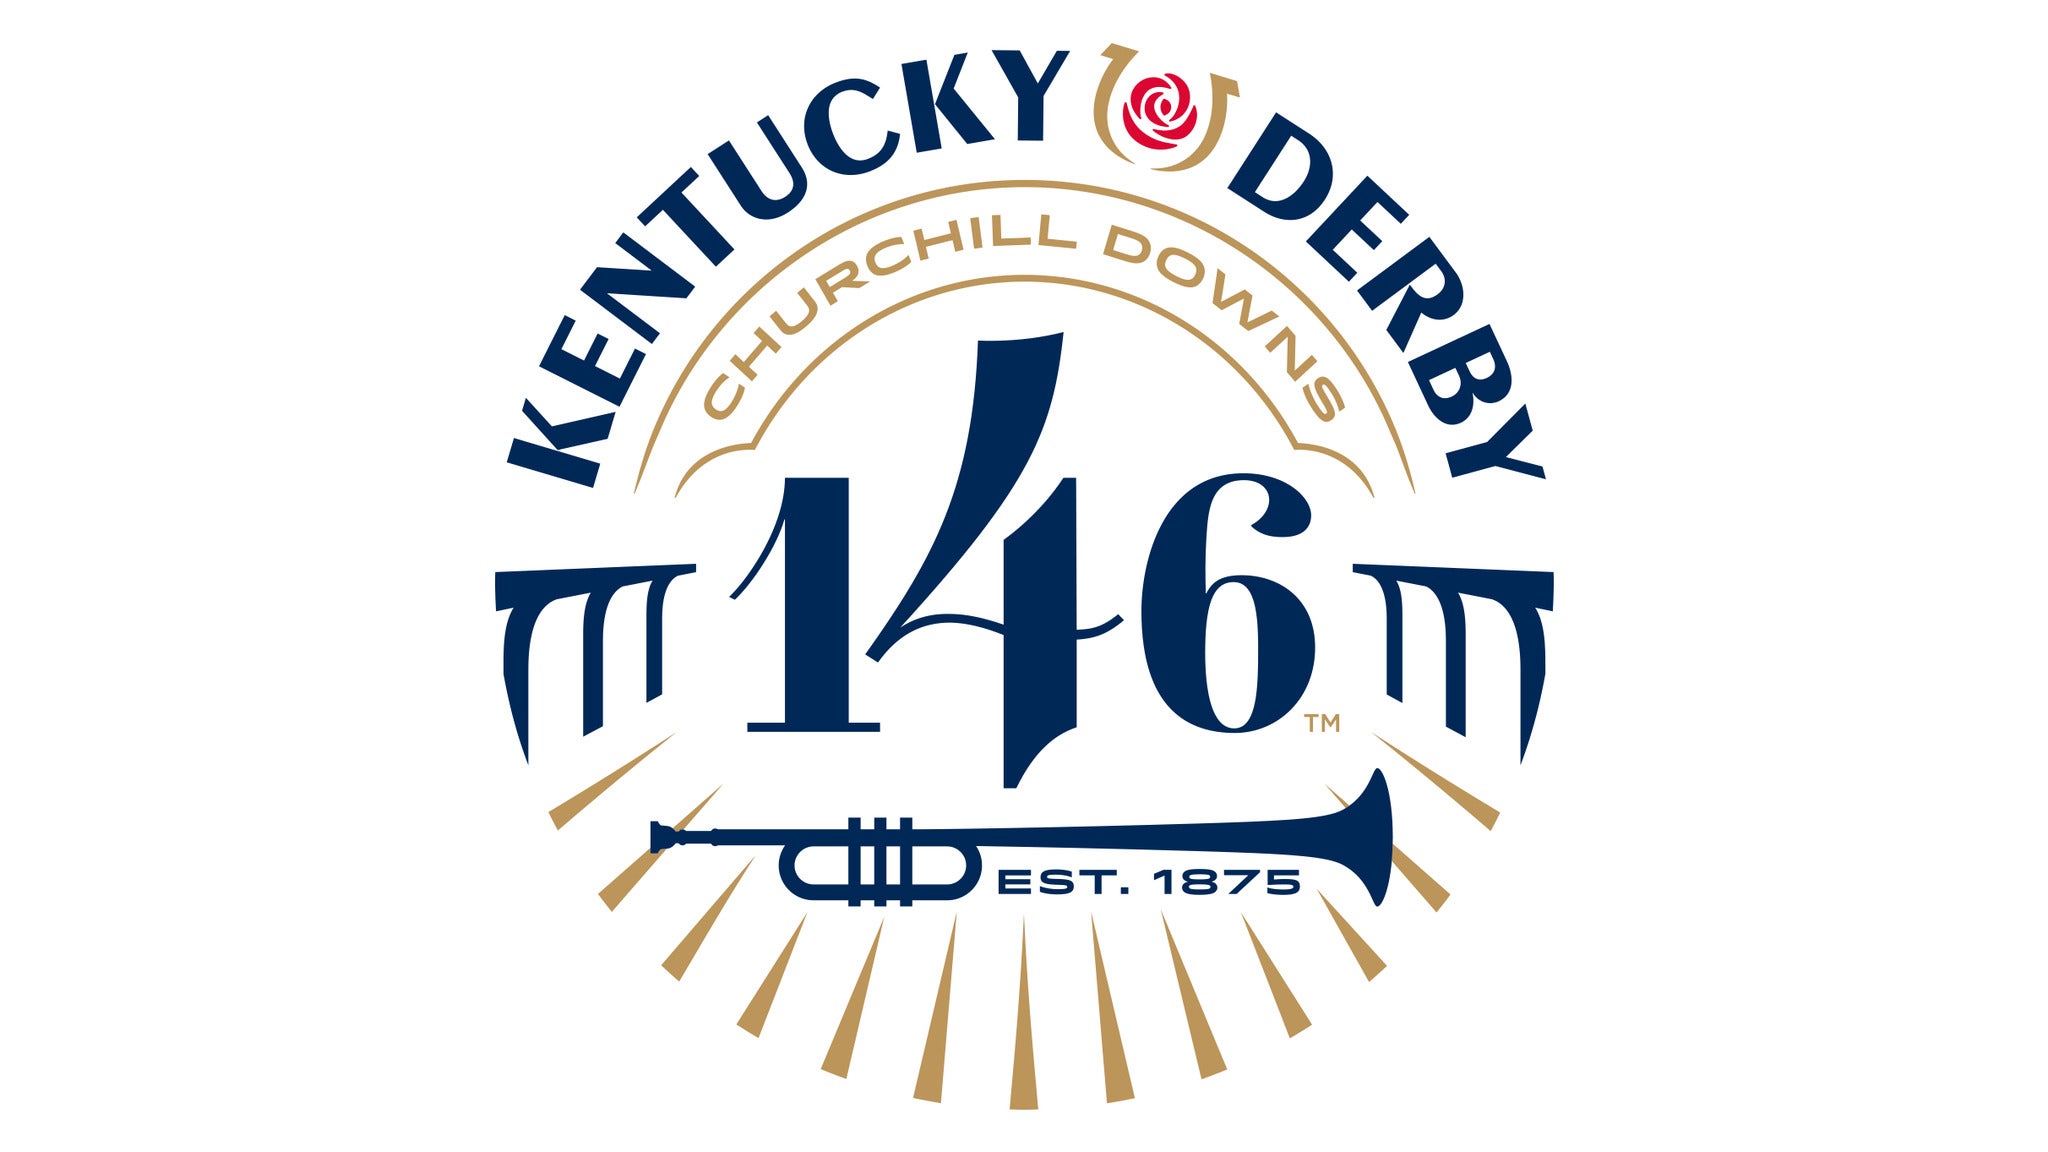 143rd Kentucky Derby & Kentucky Oaks - General Admission Plan in Louisville promo photo for Advance Purchase Pricing presale offer code